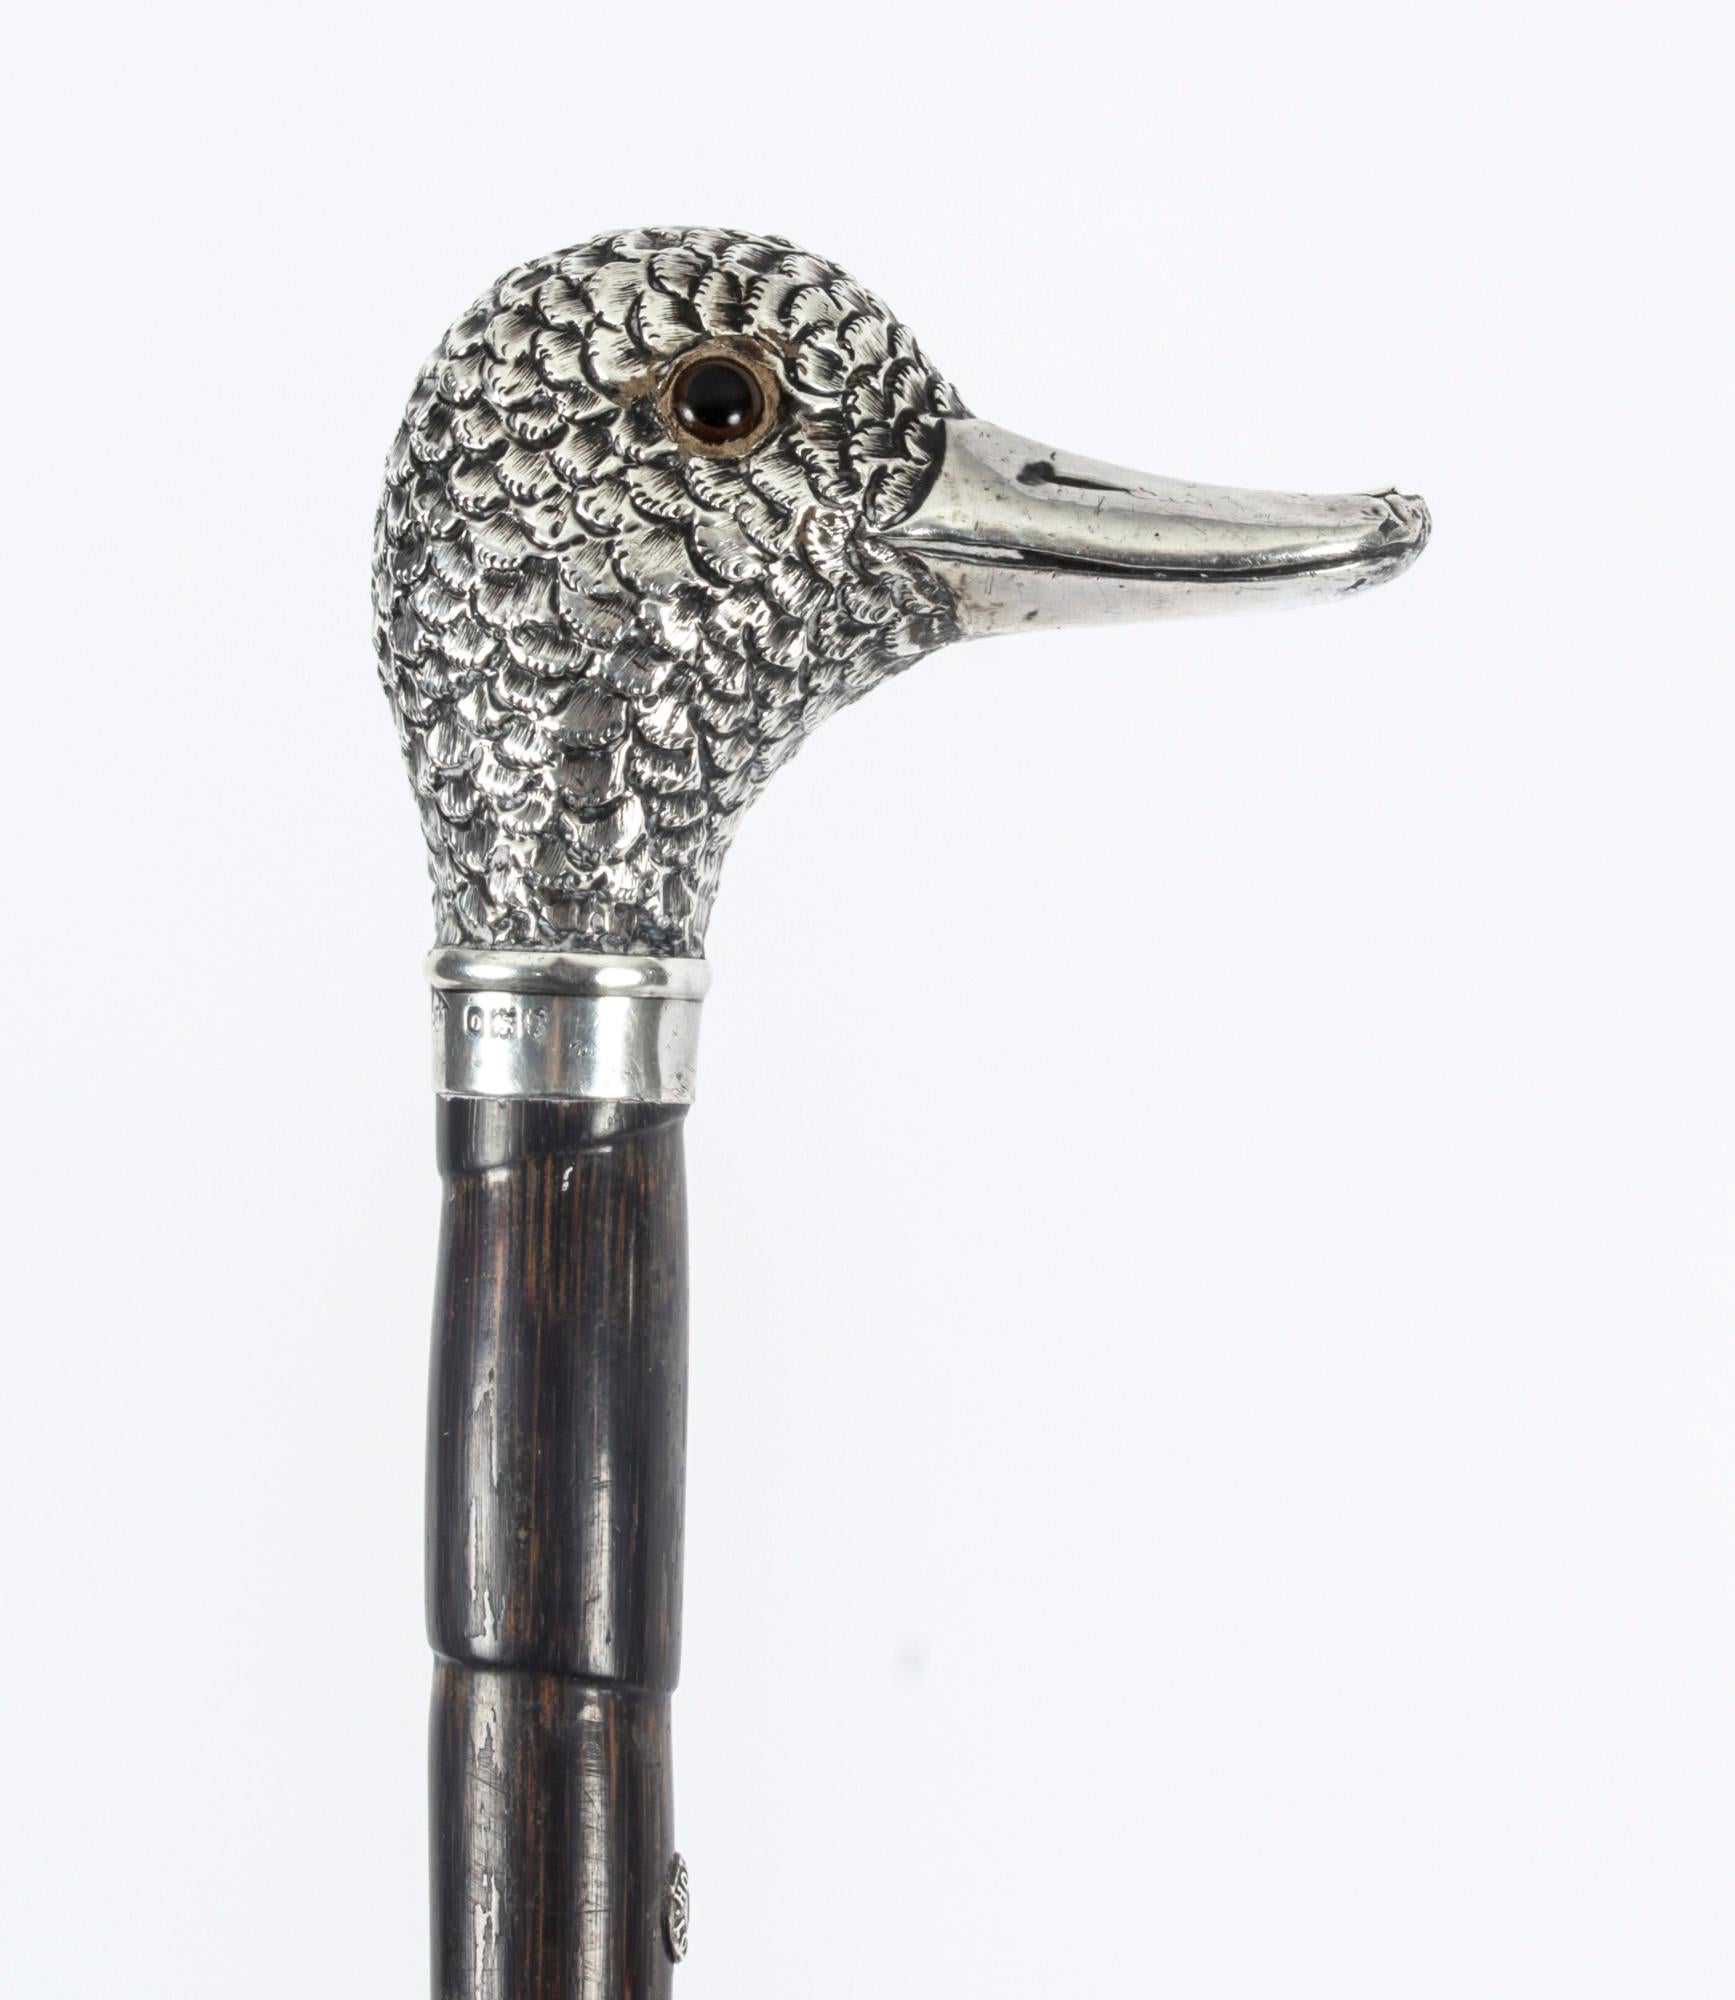 This is a beautiful Antique English sterling silver duck head handle walking stick bearing the makers mark for TJD Birmingham, hallmarks for 1938. and retailed by Howell London. 

This charming walking cane features a finely cast sterling silver